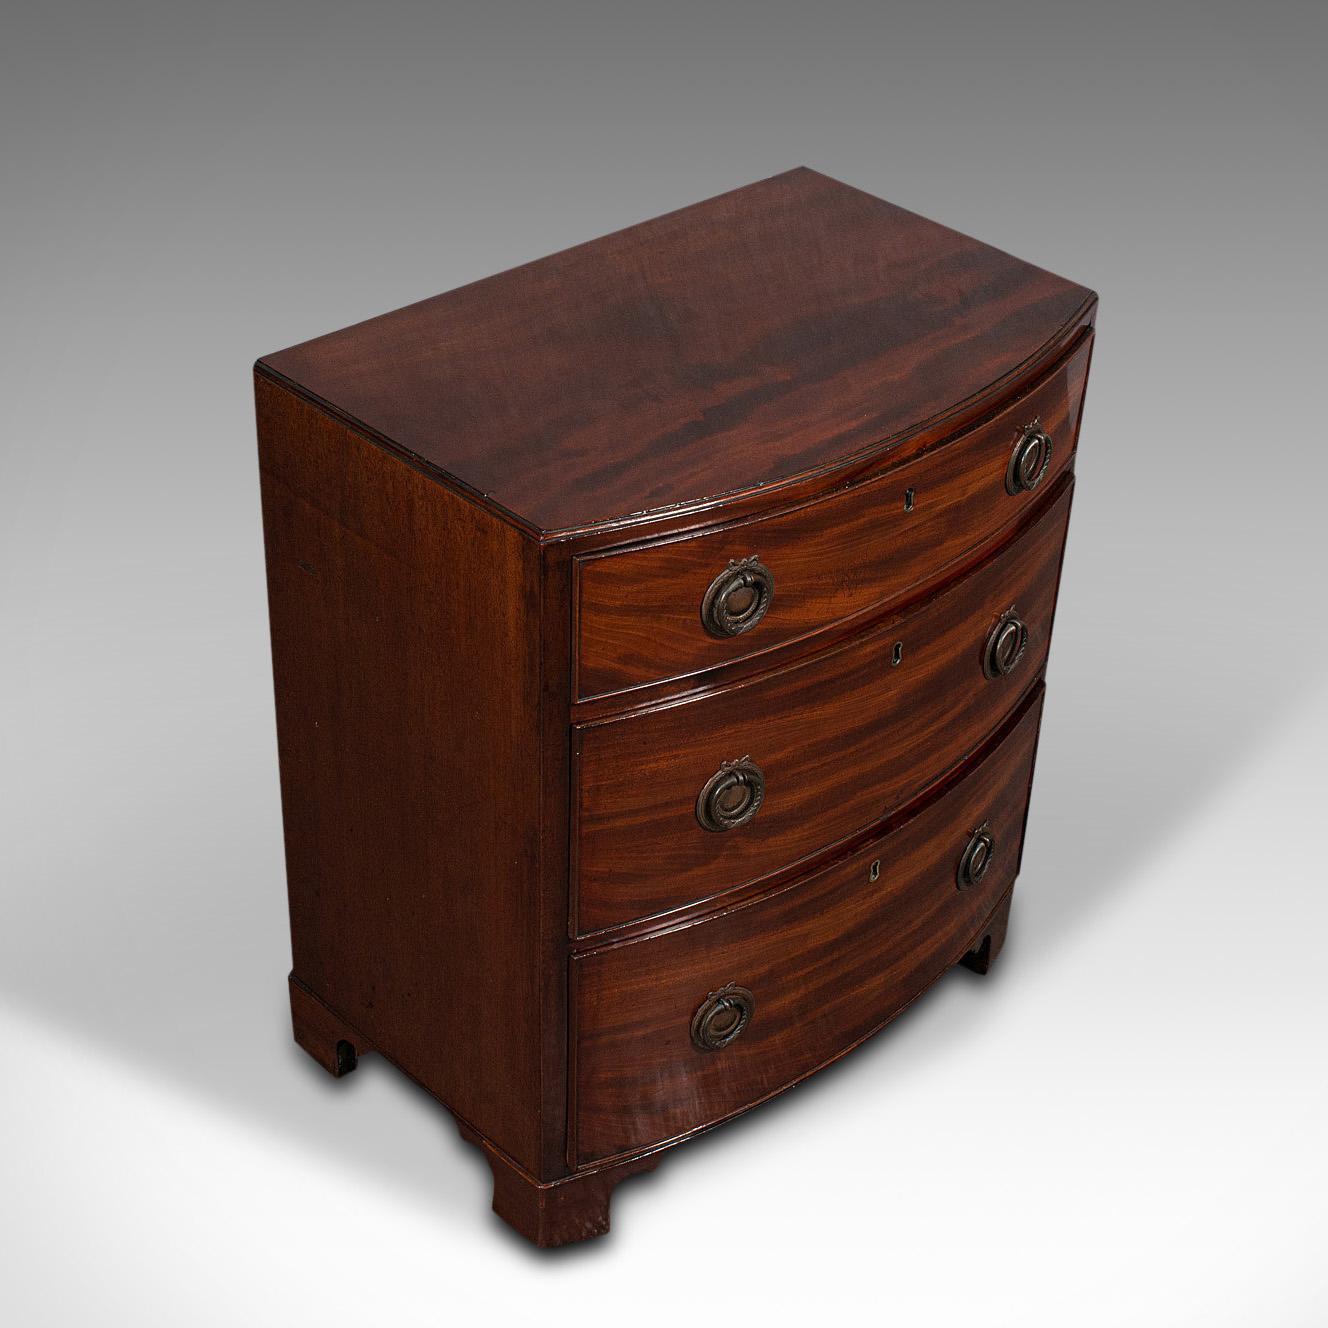 Compact Antique Chest of Drawers, English, Mahogany, Bedside Stand, Georgian 1